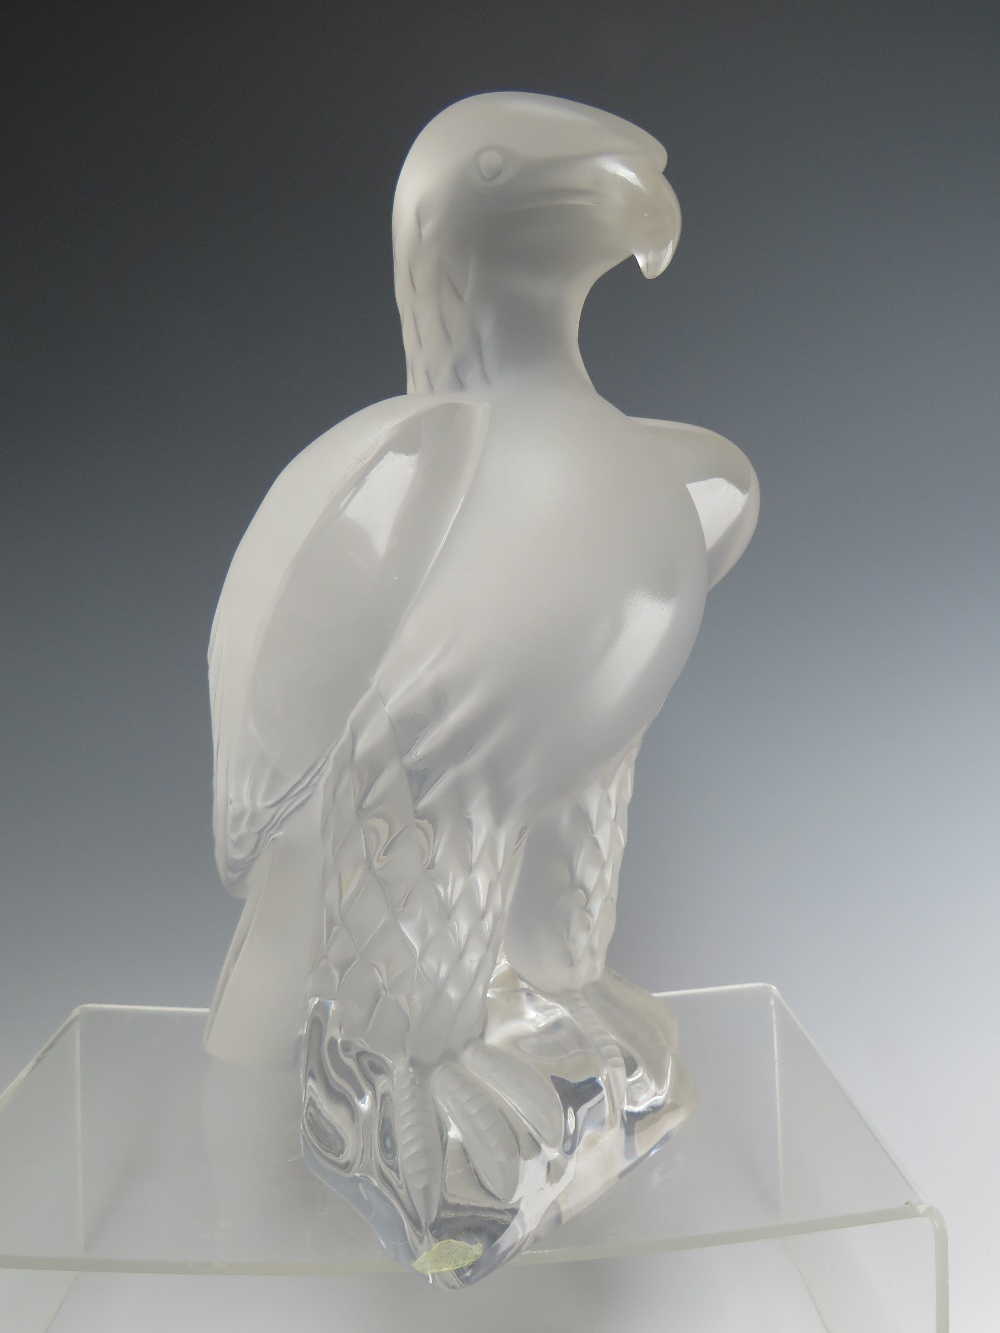 RENÉ LALIQUE (1860-1945). CRYSTAL FROSTED GLASS LIBERTY EAGLE SCULPTURE, engraved marks to base, H